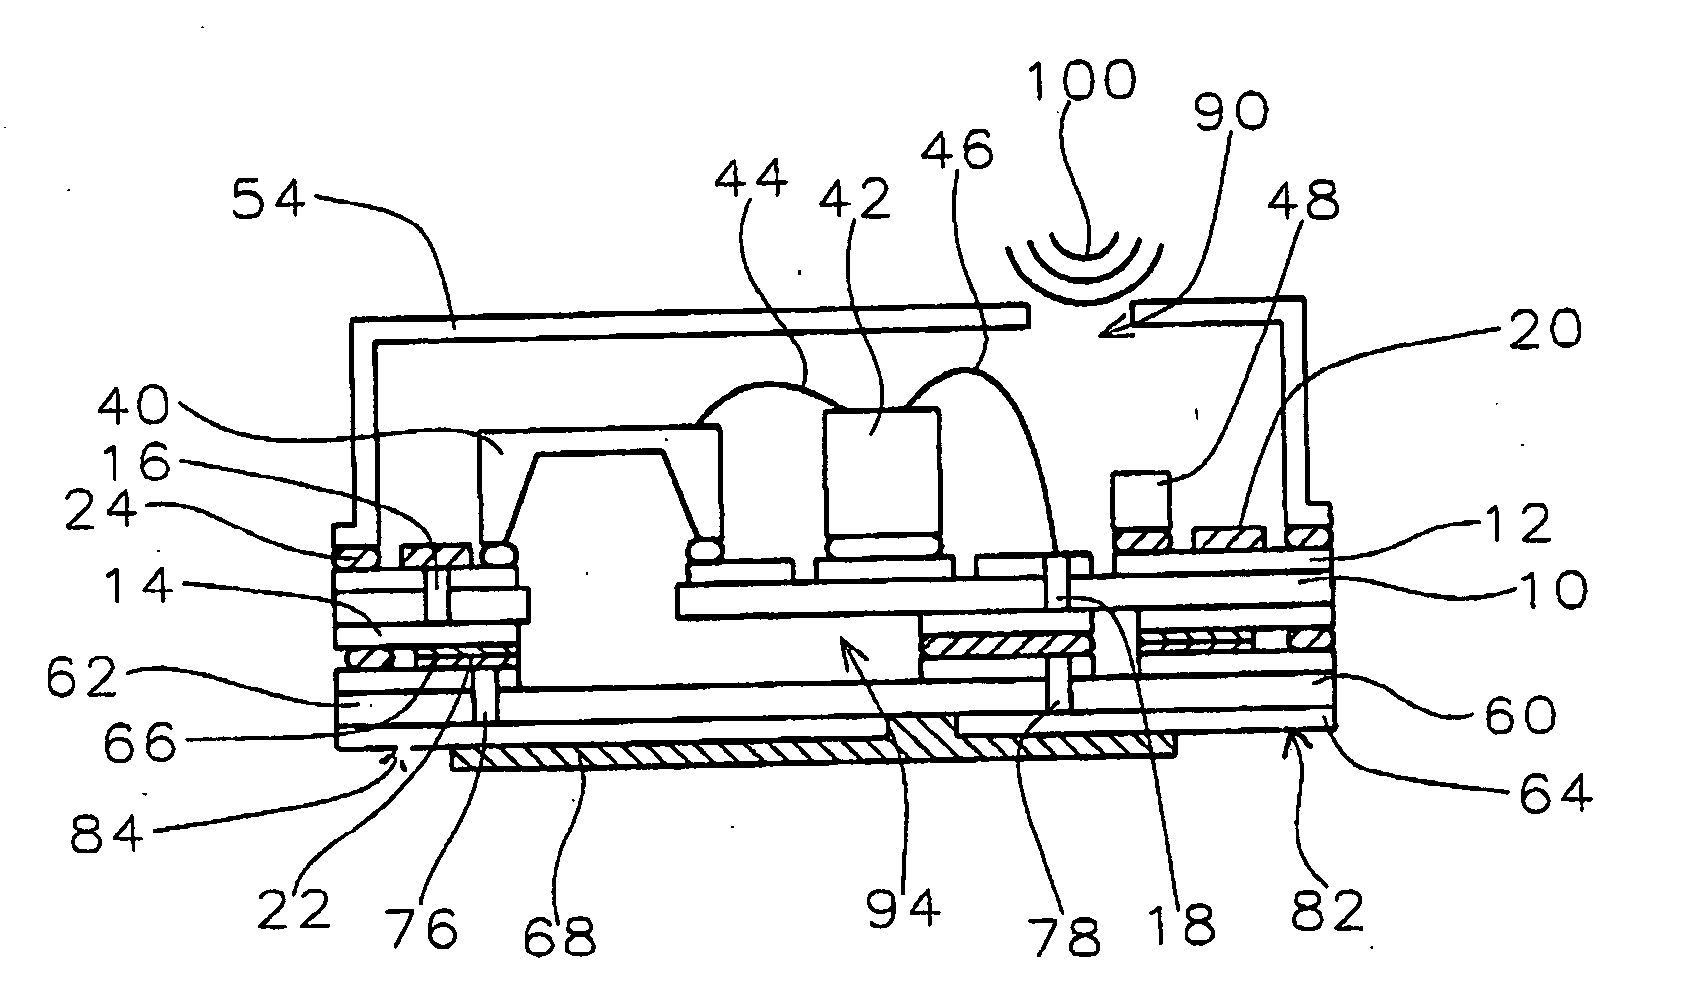 MEMS microphone with a stacked PCB package and method of producing the same